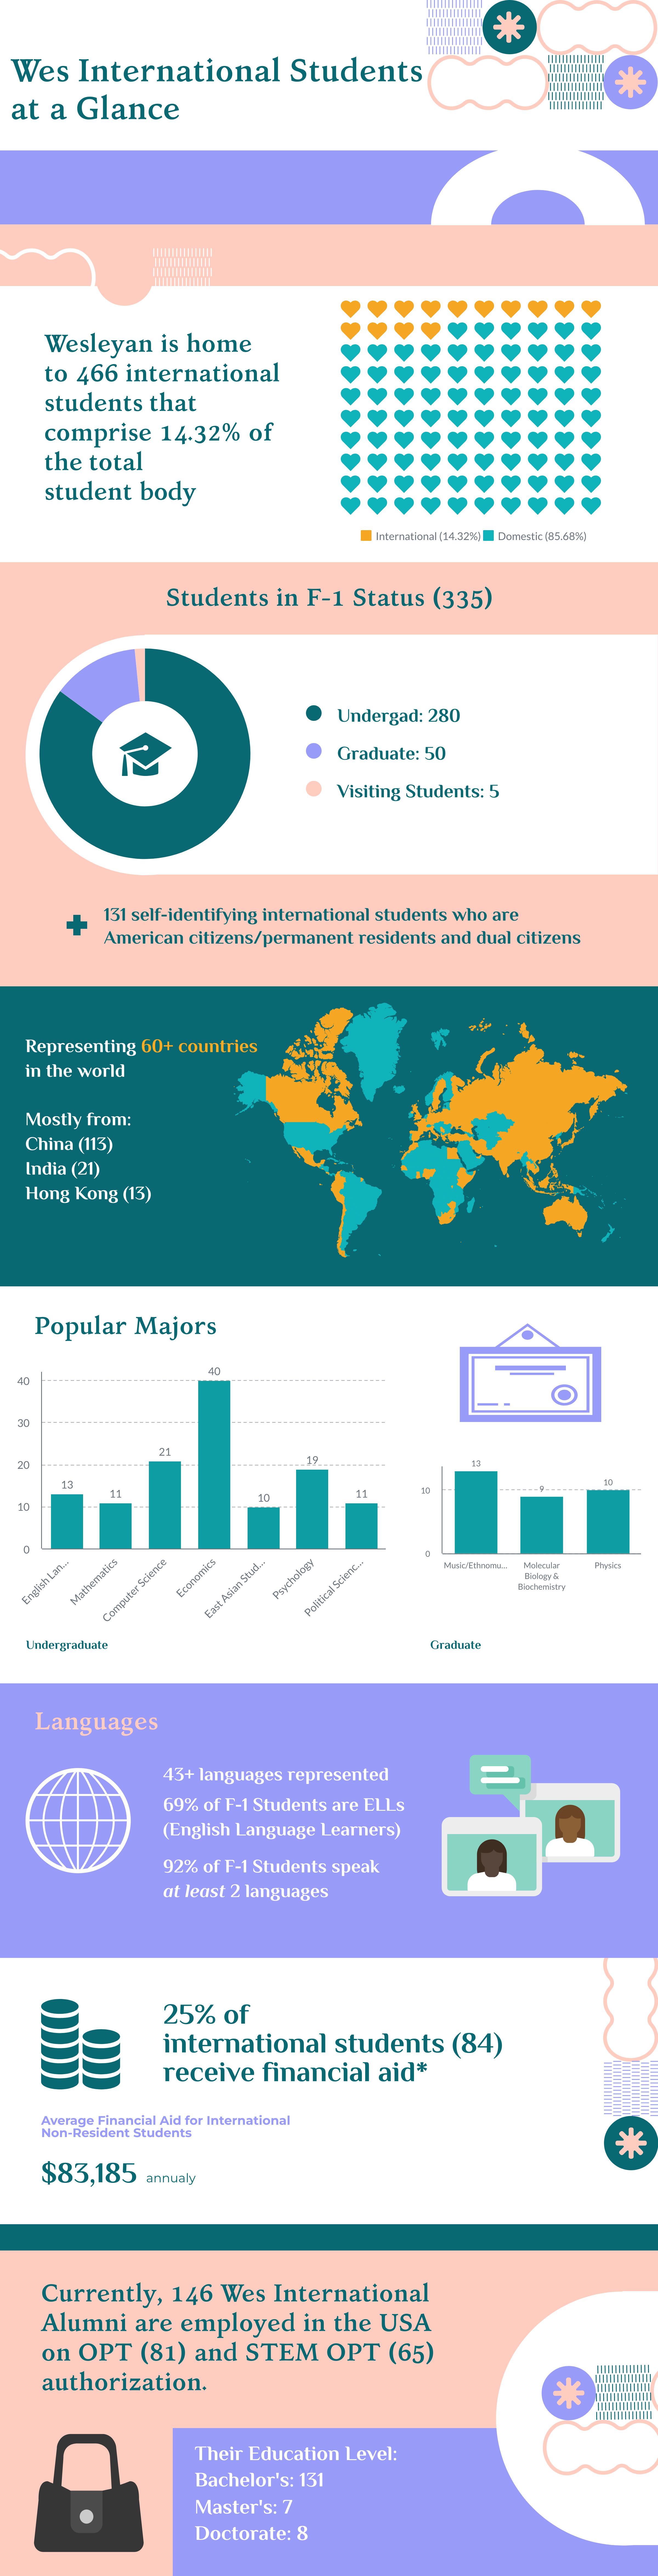 Infographic: Wes International Students at a Glance